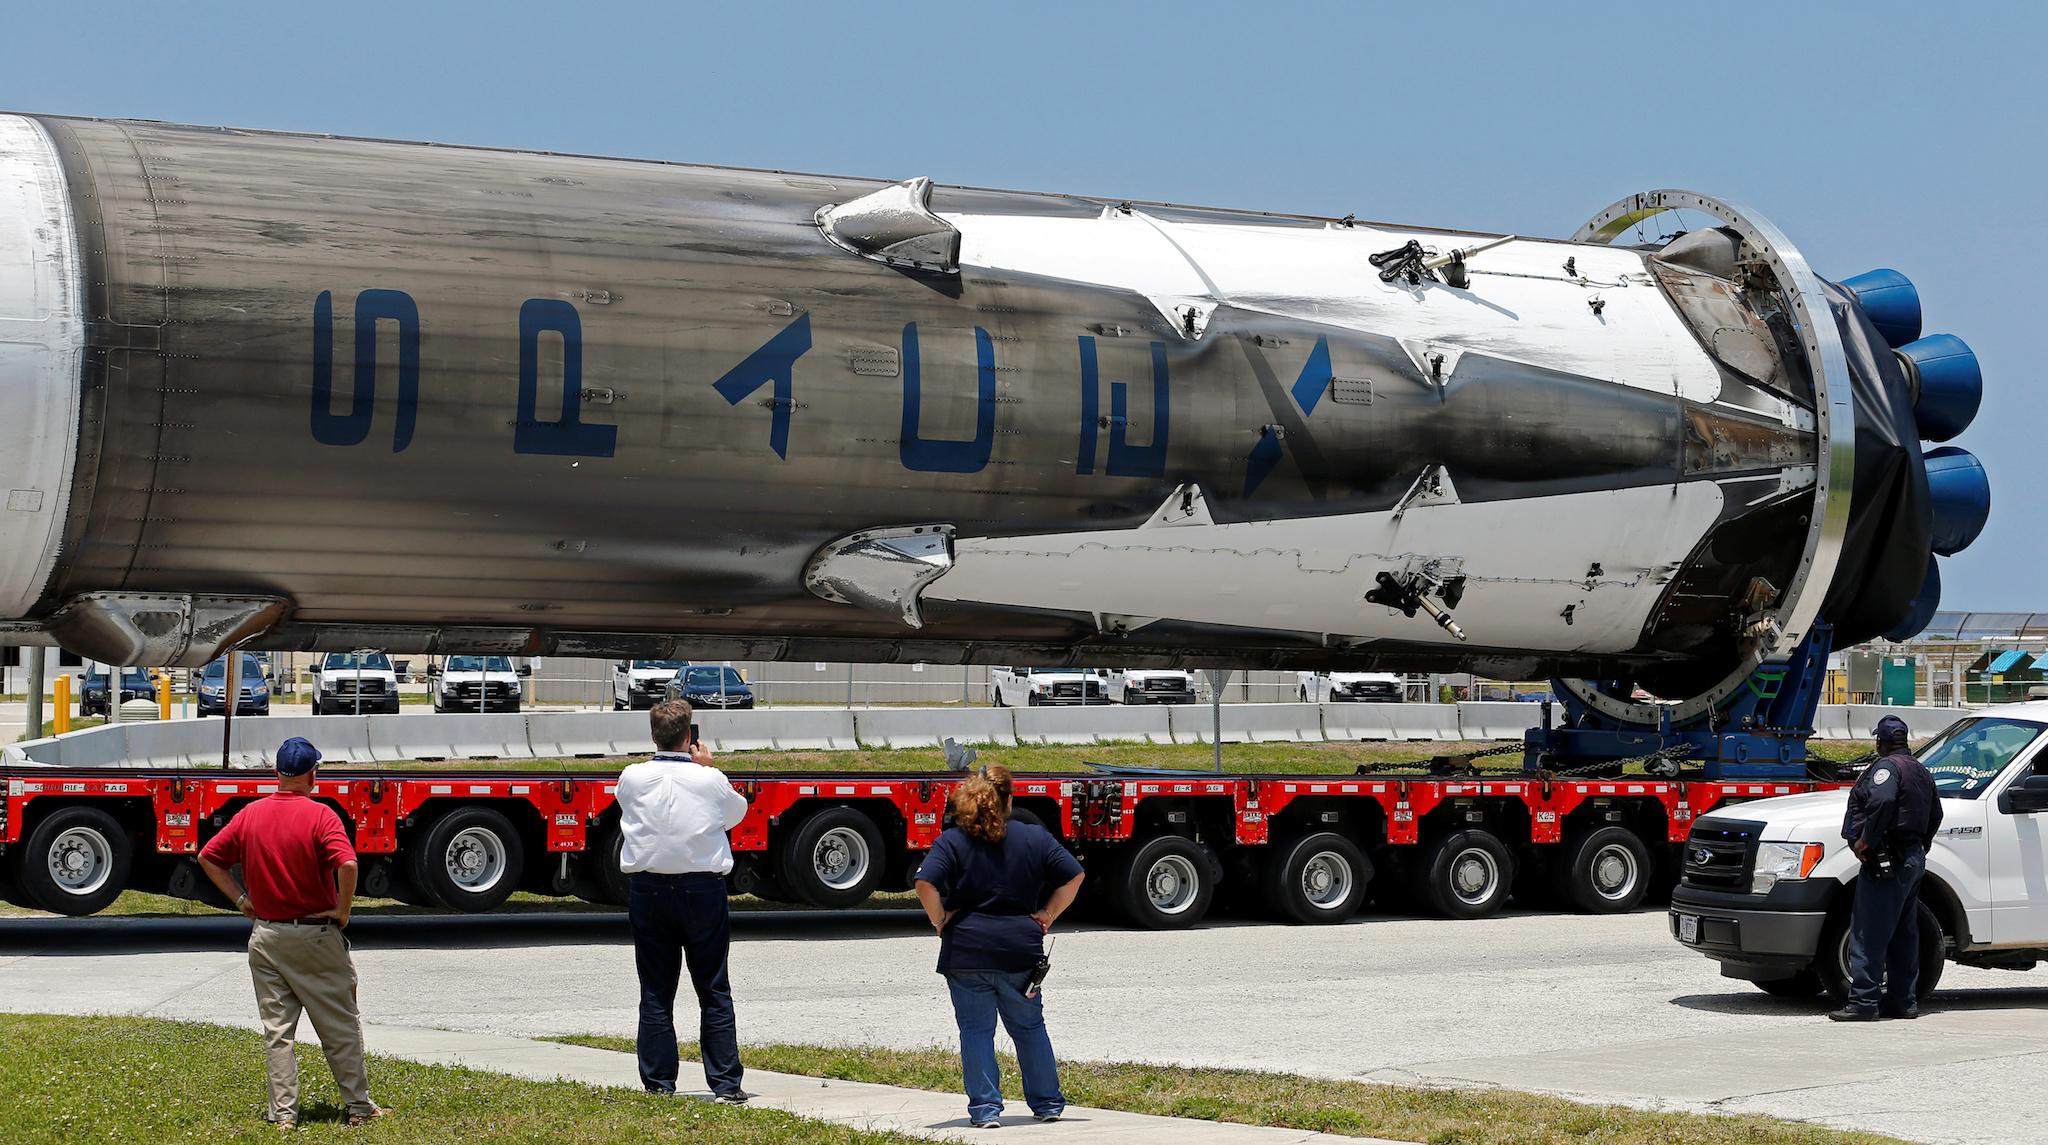 The recovered first stage of a SpaceX Falcon 9 rocket is transported to the SpaceX hangar at launch pad 39A at the Kennedy Space Center in Cape Canaveral, Florida May 14, 2016